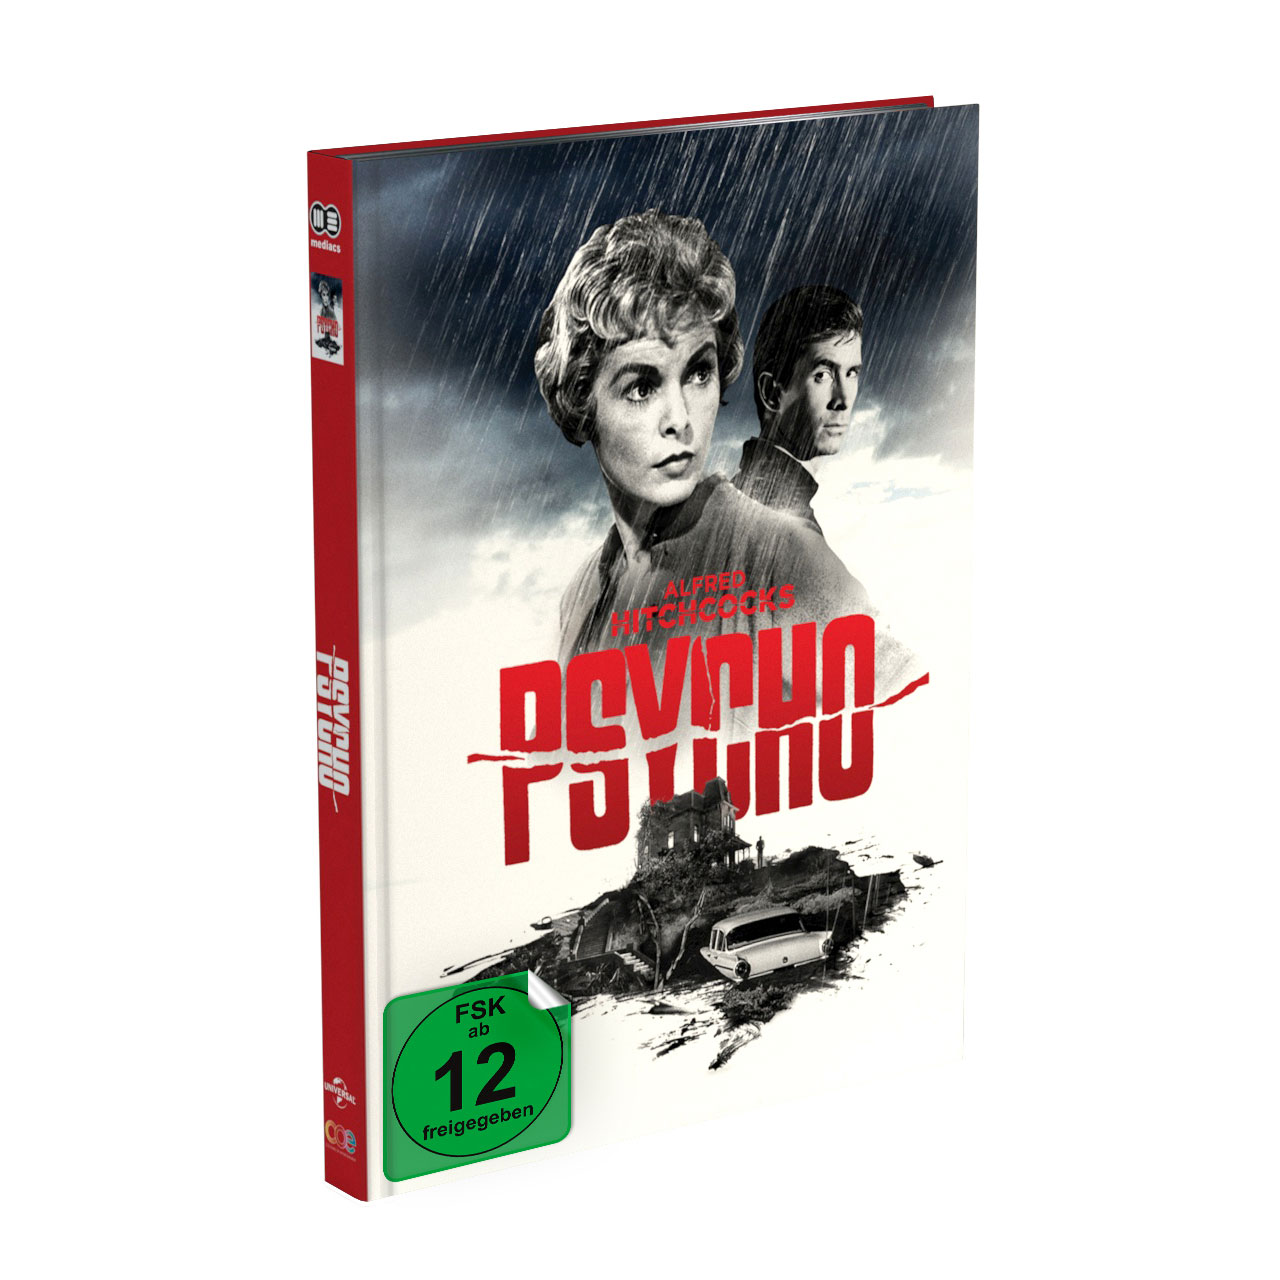 Psycho-Cover-A-stickers-FSK.jpg